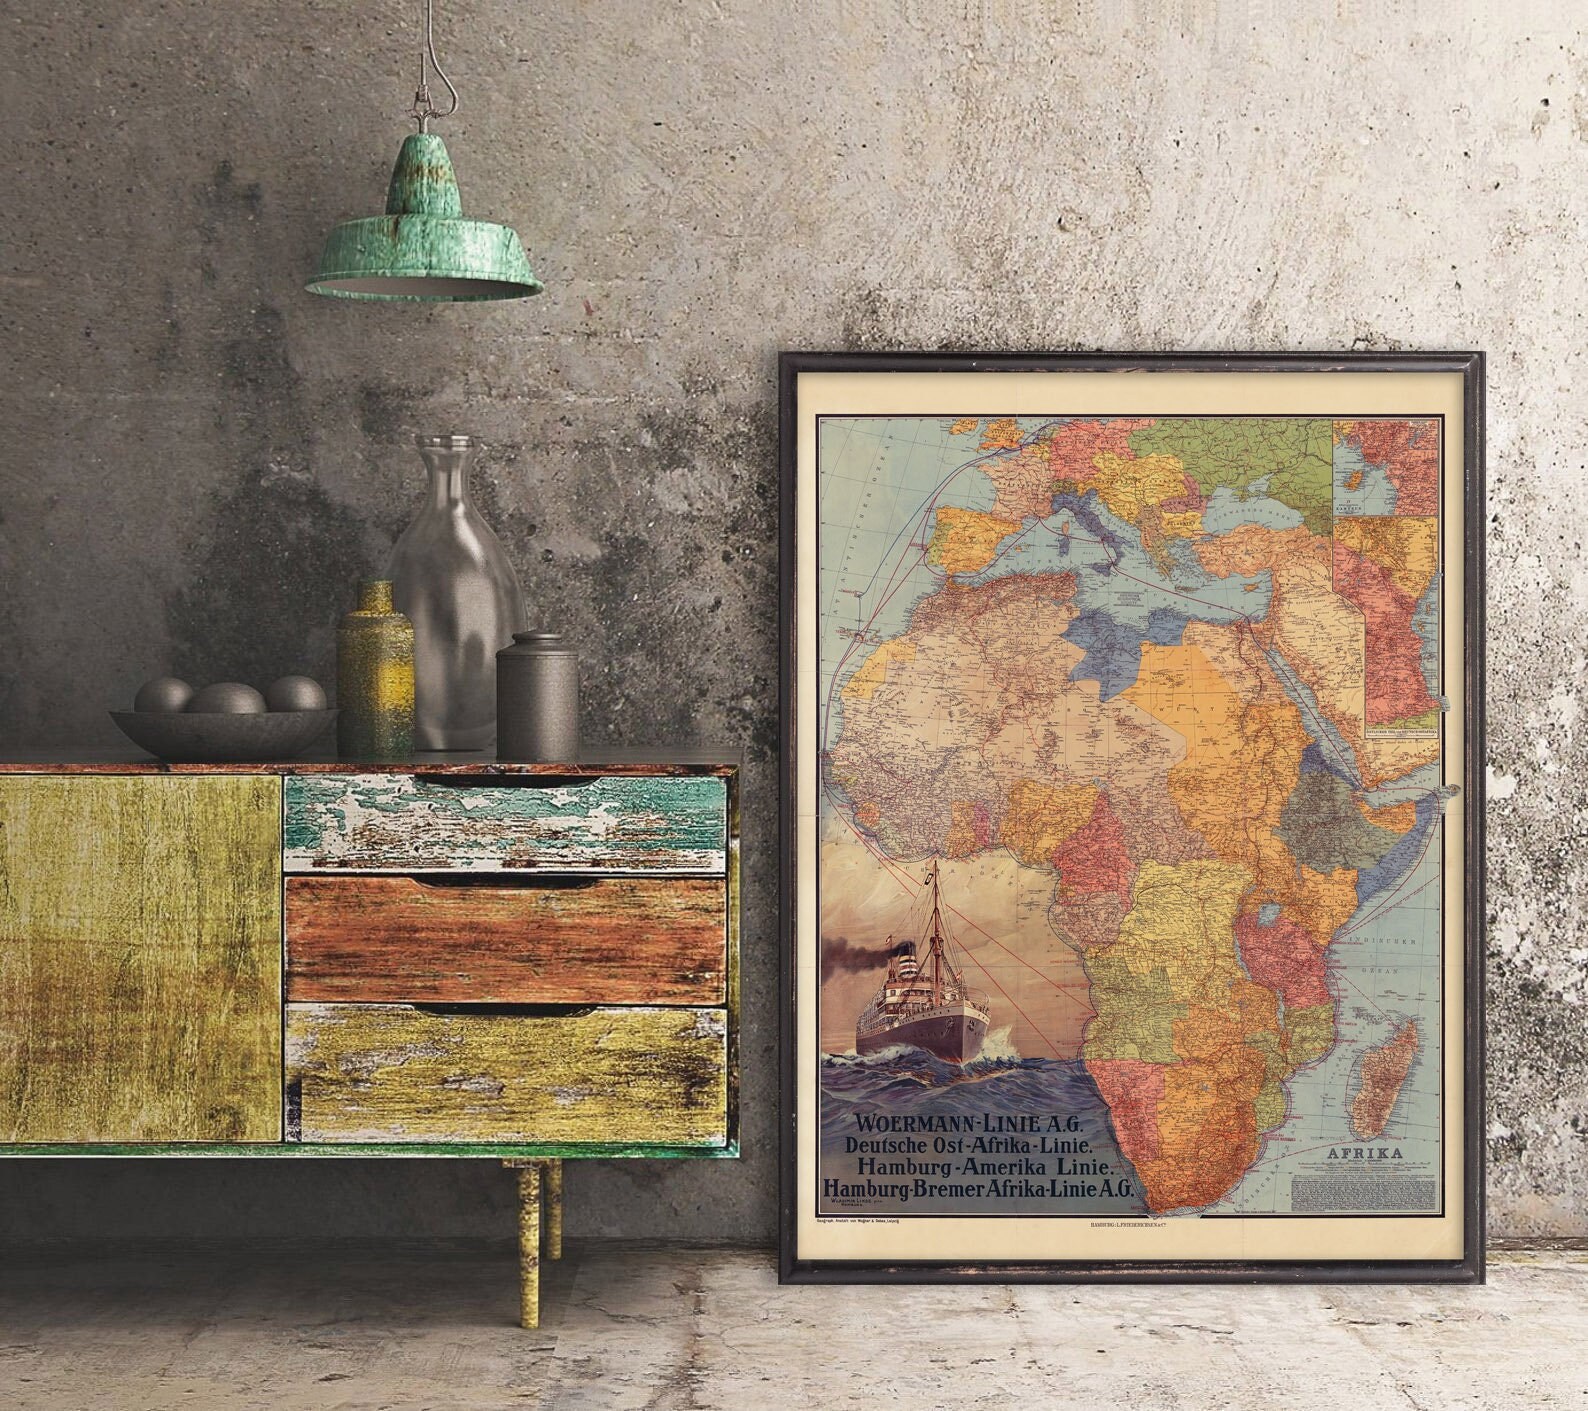 1914 Map of Africa reprint sold UNFRAMED pre-WWI German-language Africa map reprint 4 Large/XL sizes up to 36 x 48 & 3 color choices